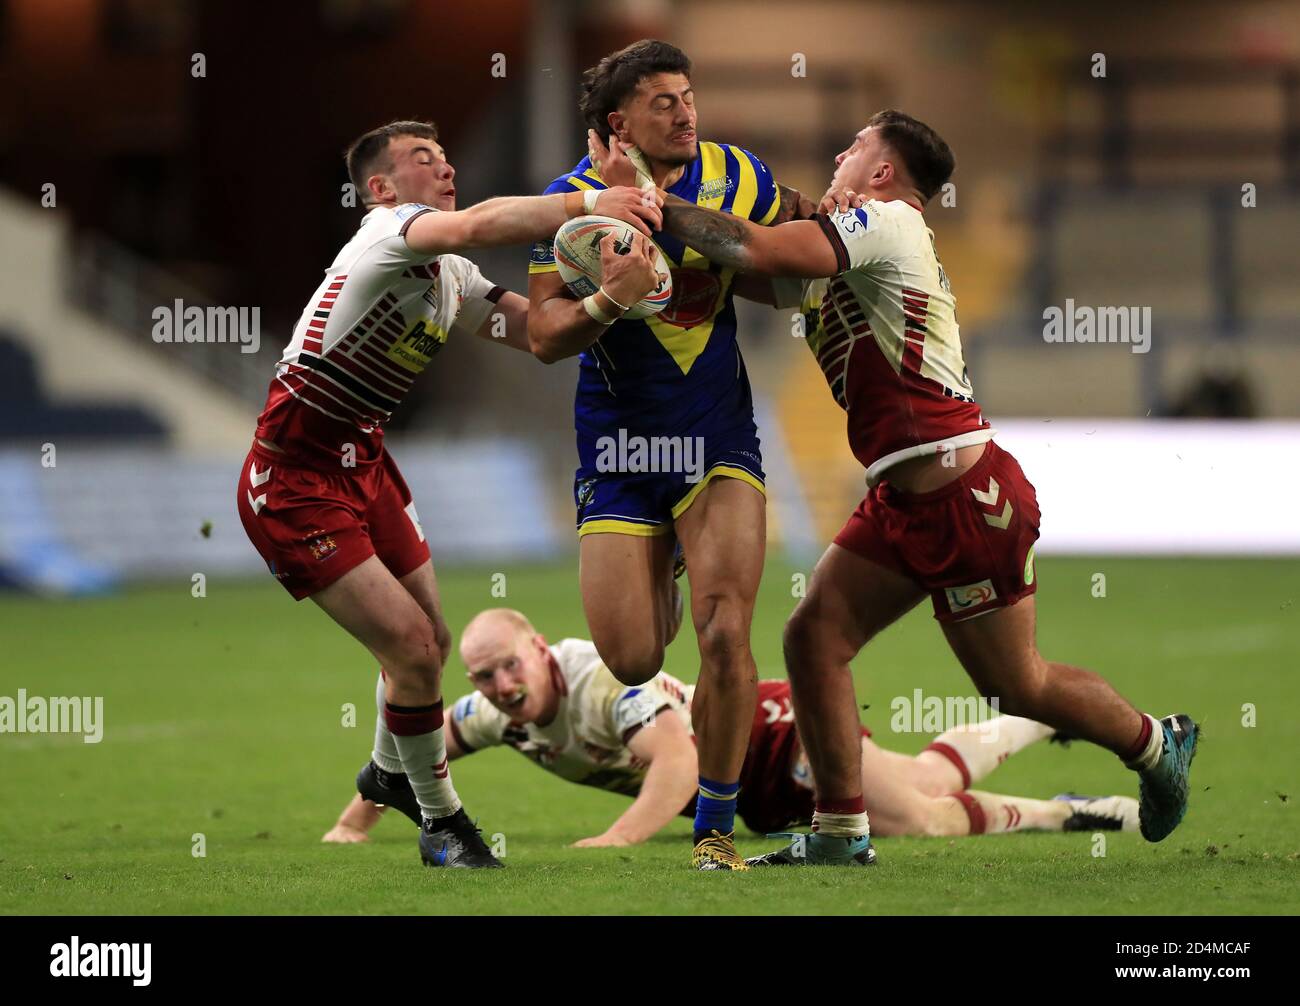 Warrington Wolves' Anthony Gelling (centre) is tackled by Wigan Warriors' Oliver Partington (left) and Harry Smith as Liam Farrell looks on during the Betfred Super League match at Emerald Headingley Stadium, Leeds. Stock Photo